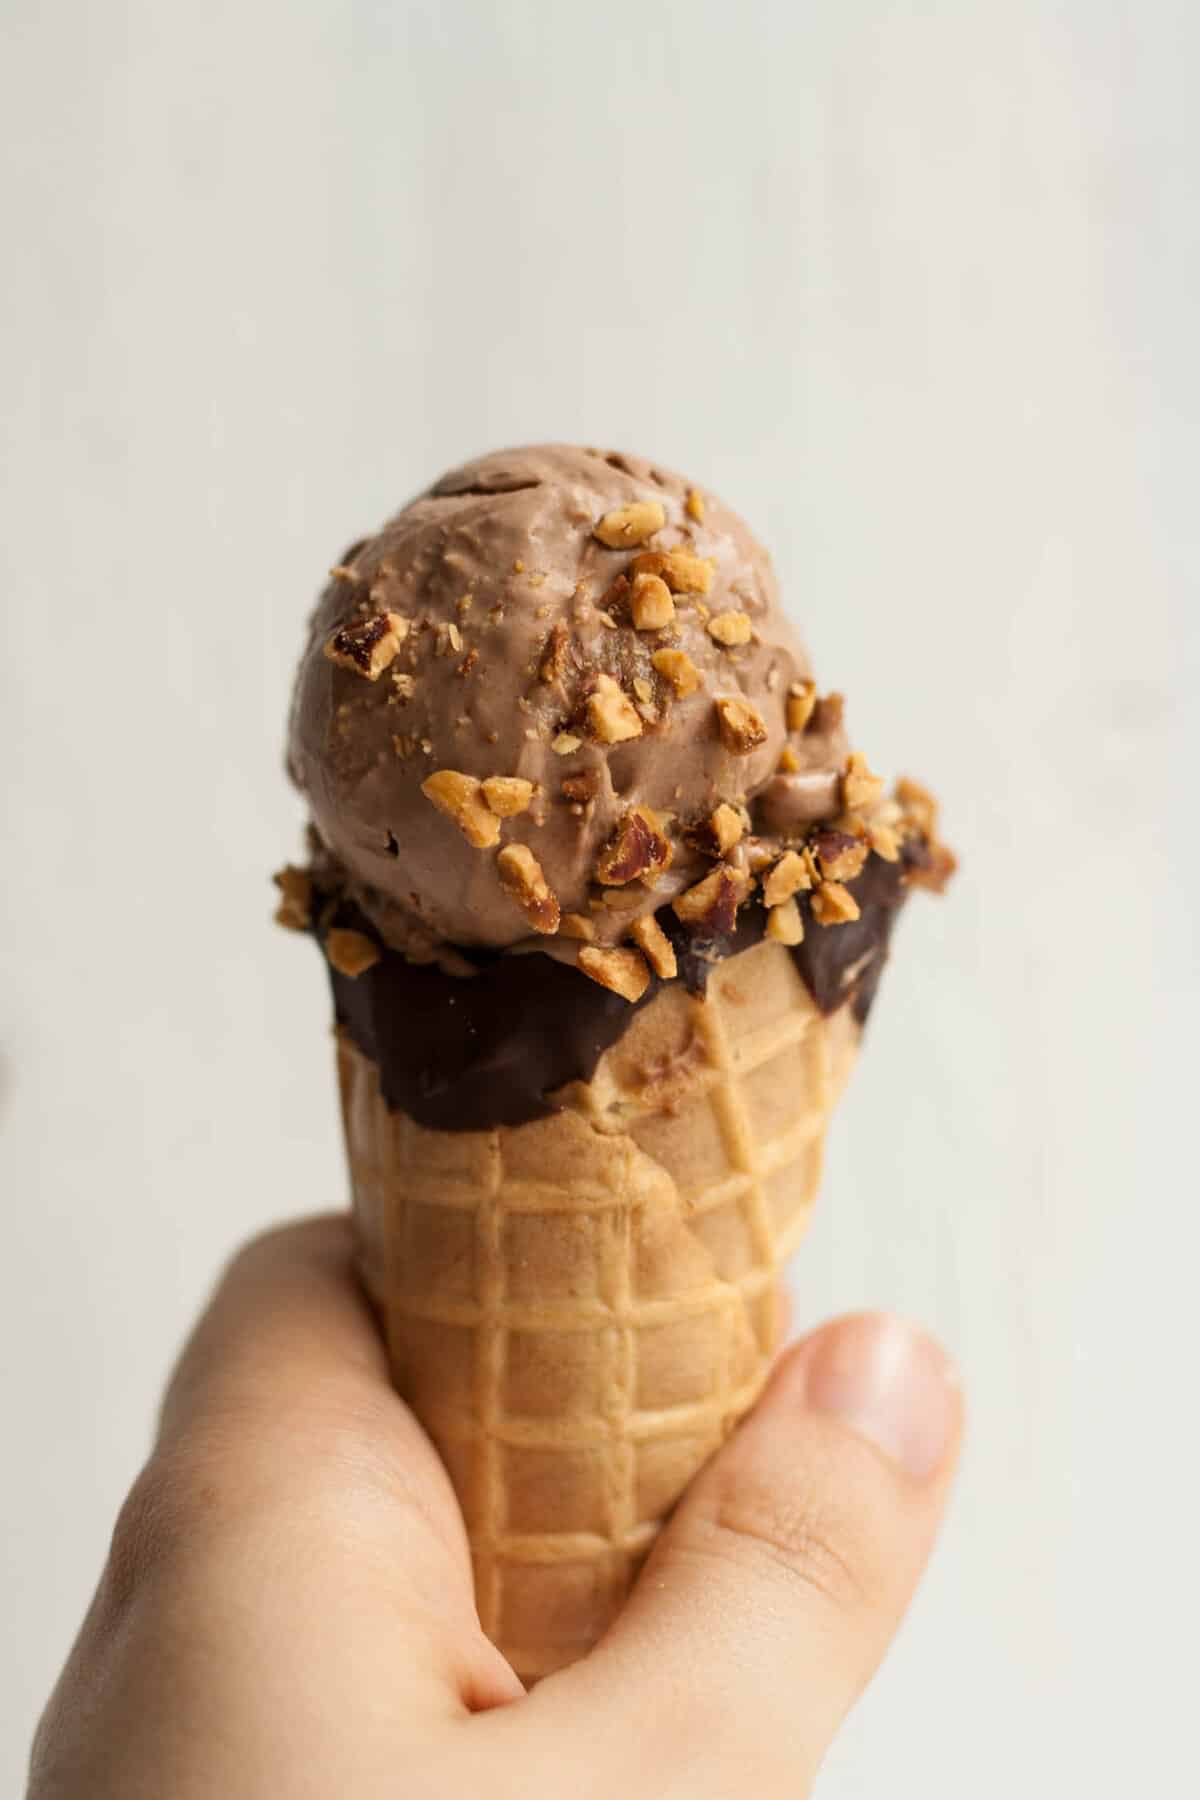 A person holding a mocha ice cream waffle cone with nuts sprinkled on top.